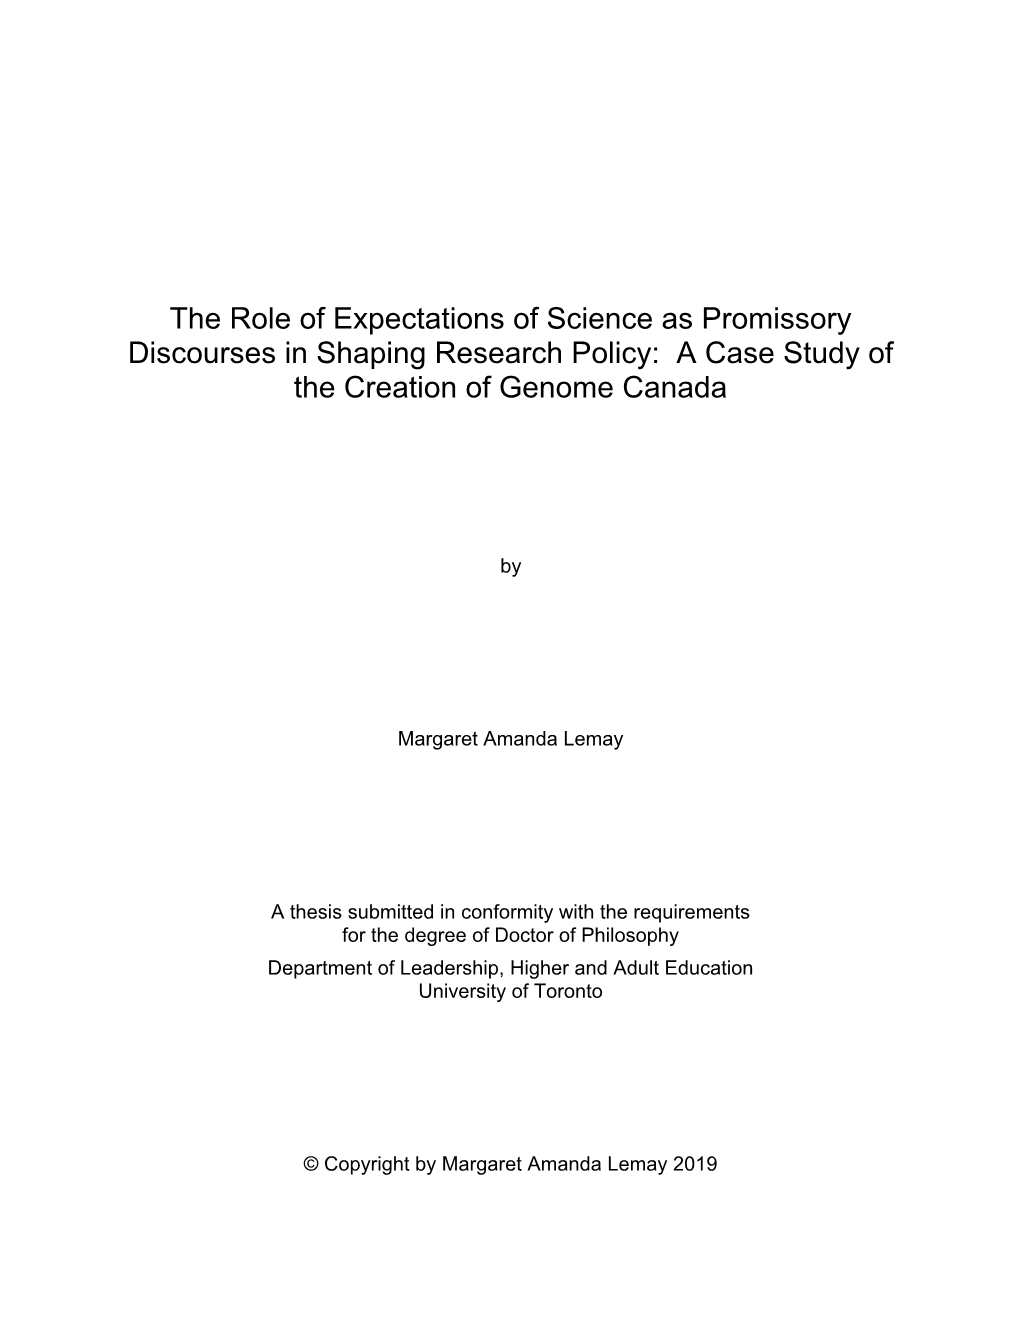 The Role of Expectations of Science As Promissory Discourses in Shaping Research Policy: a Case Study of the Creation of Genome Canada